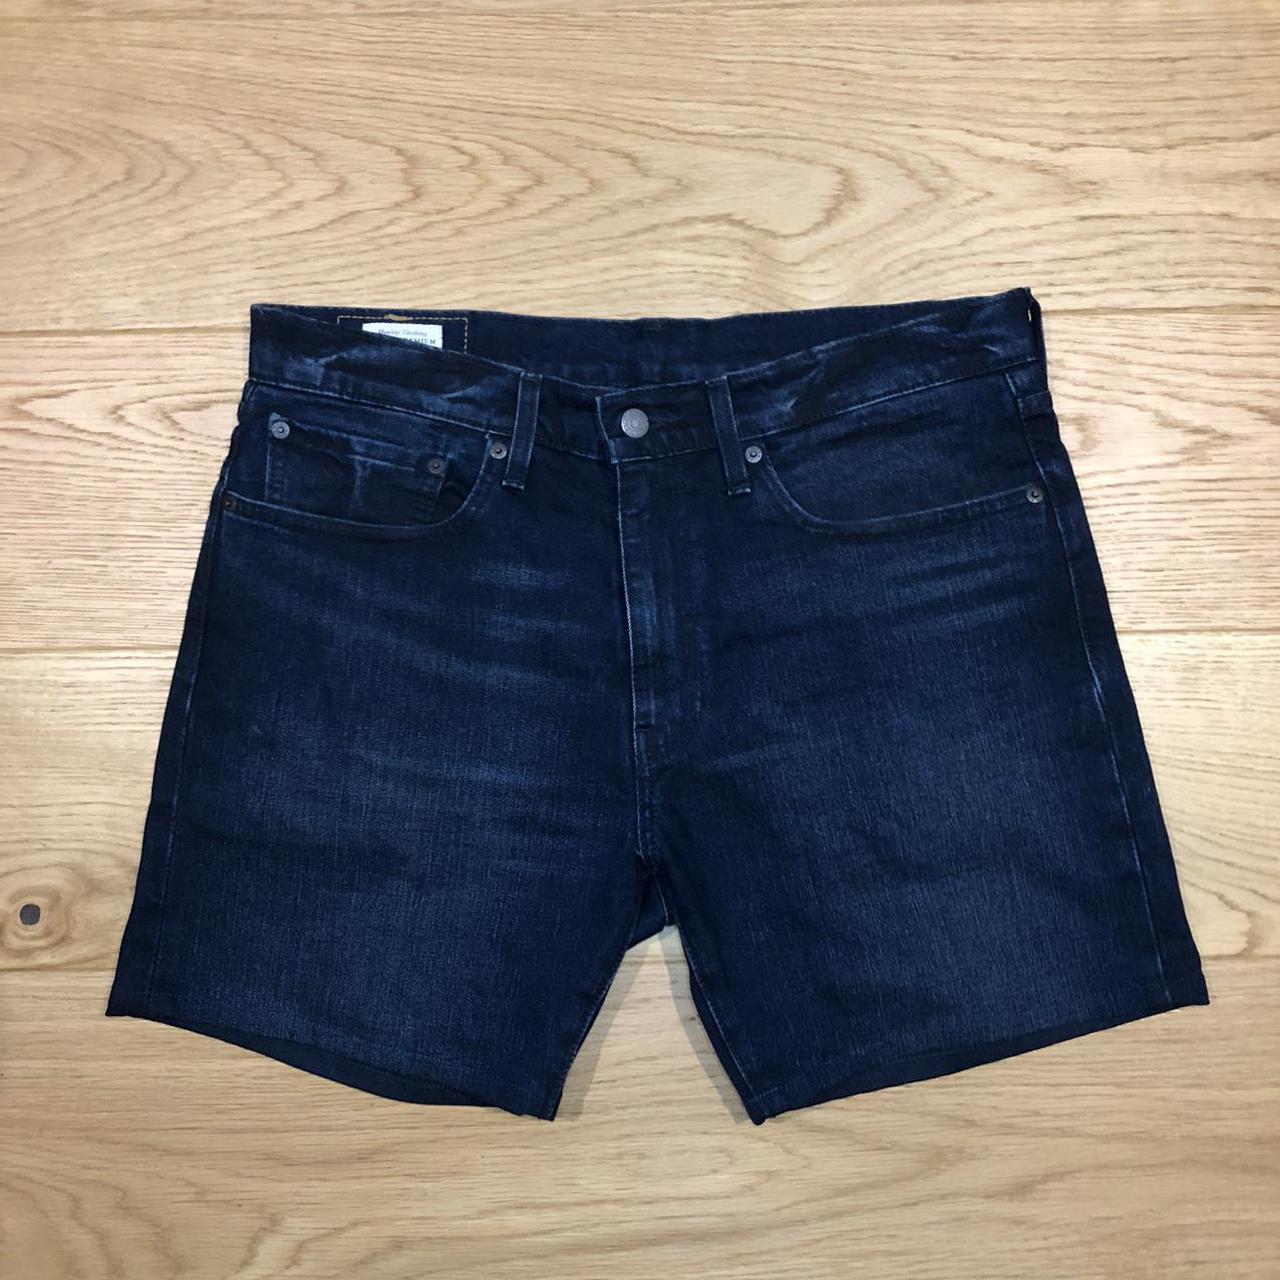 Levi's Men's Navy and Blue Shorts